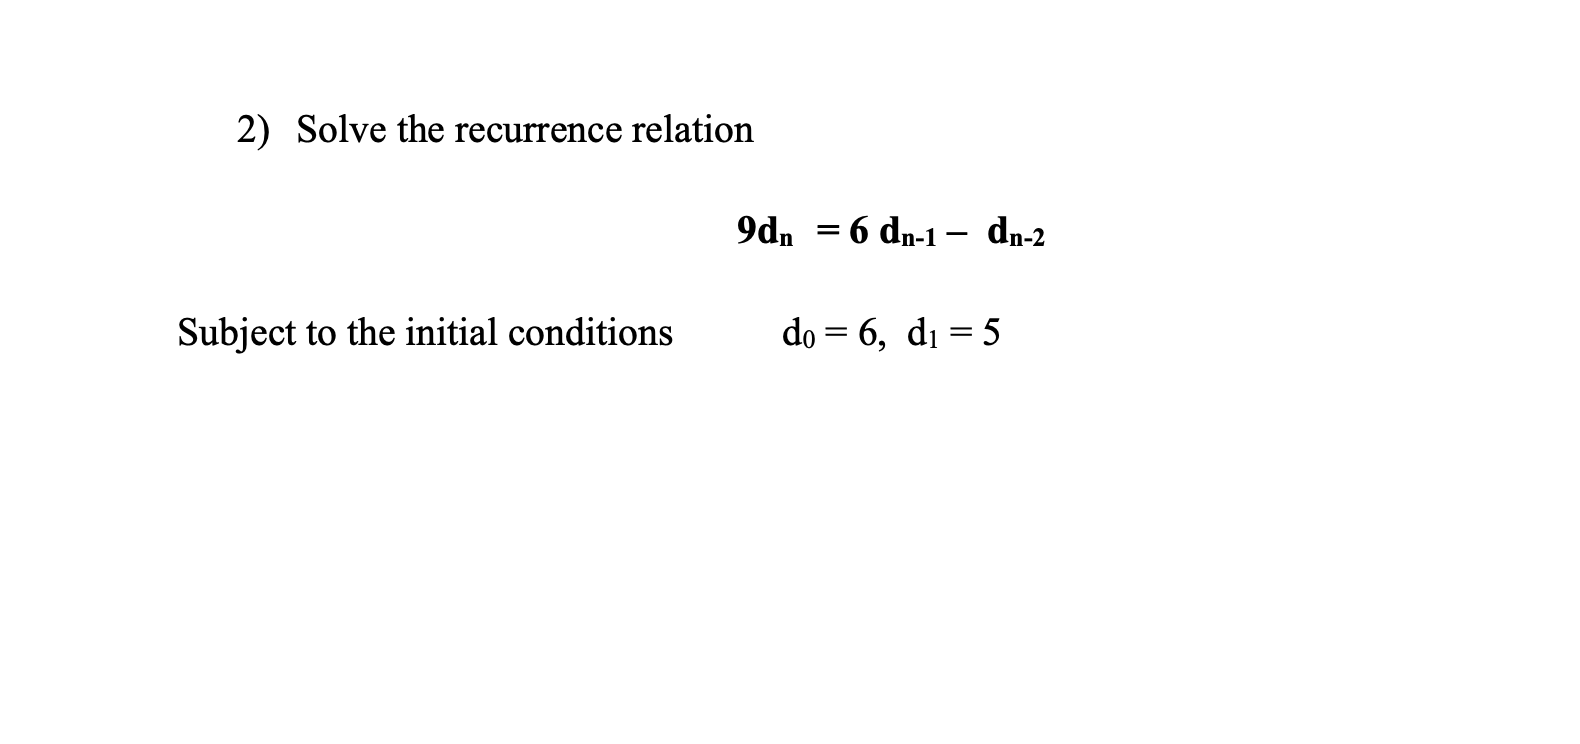 2) Solve the recurrence relation
9dn = 6 dn-1 - dn-2
Subject to the initial conditions
do = 6, di = 5
